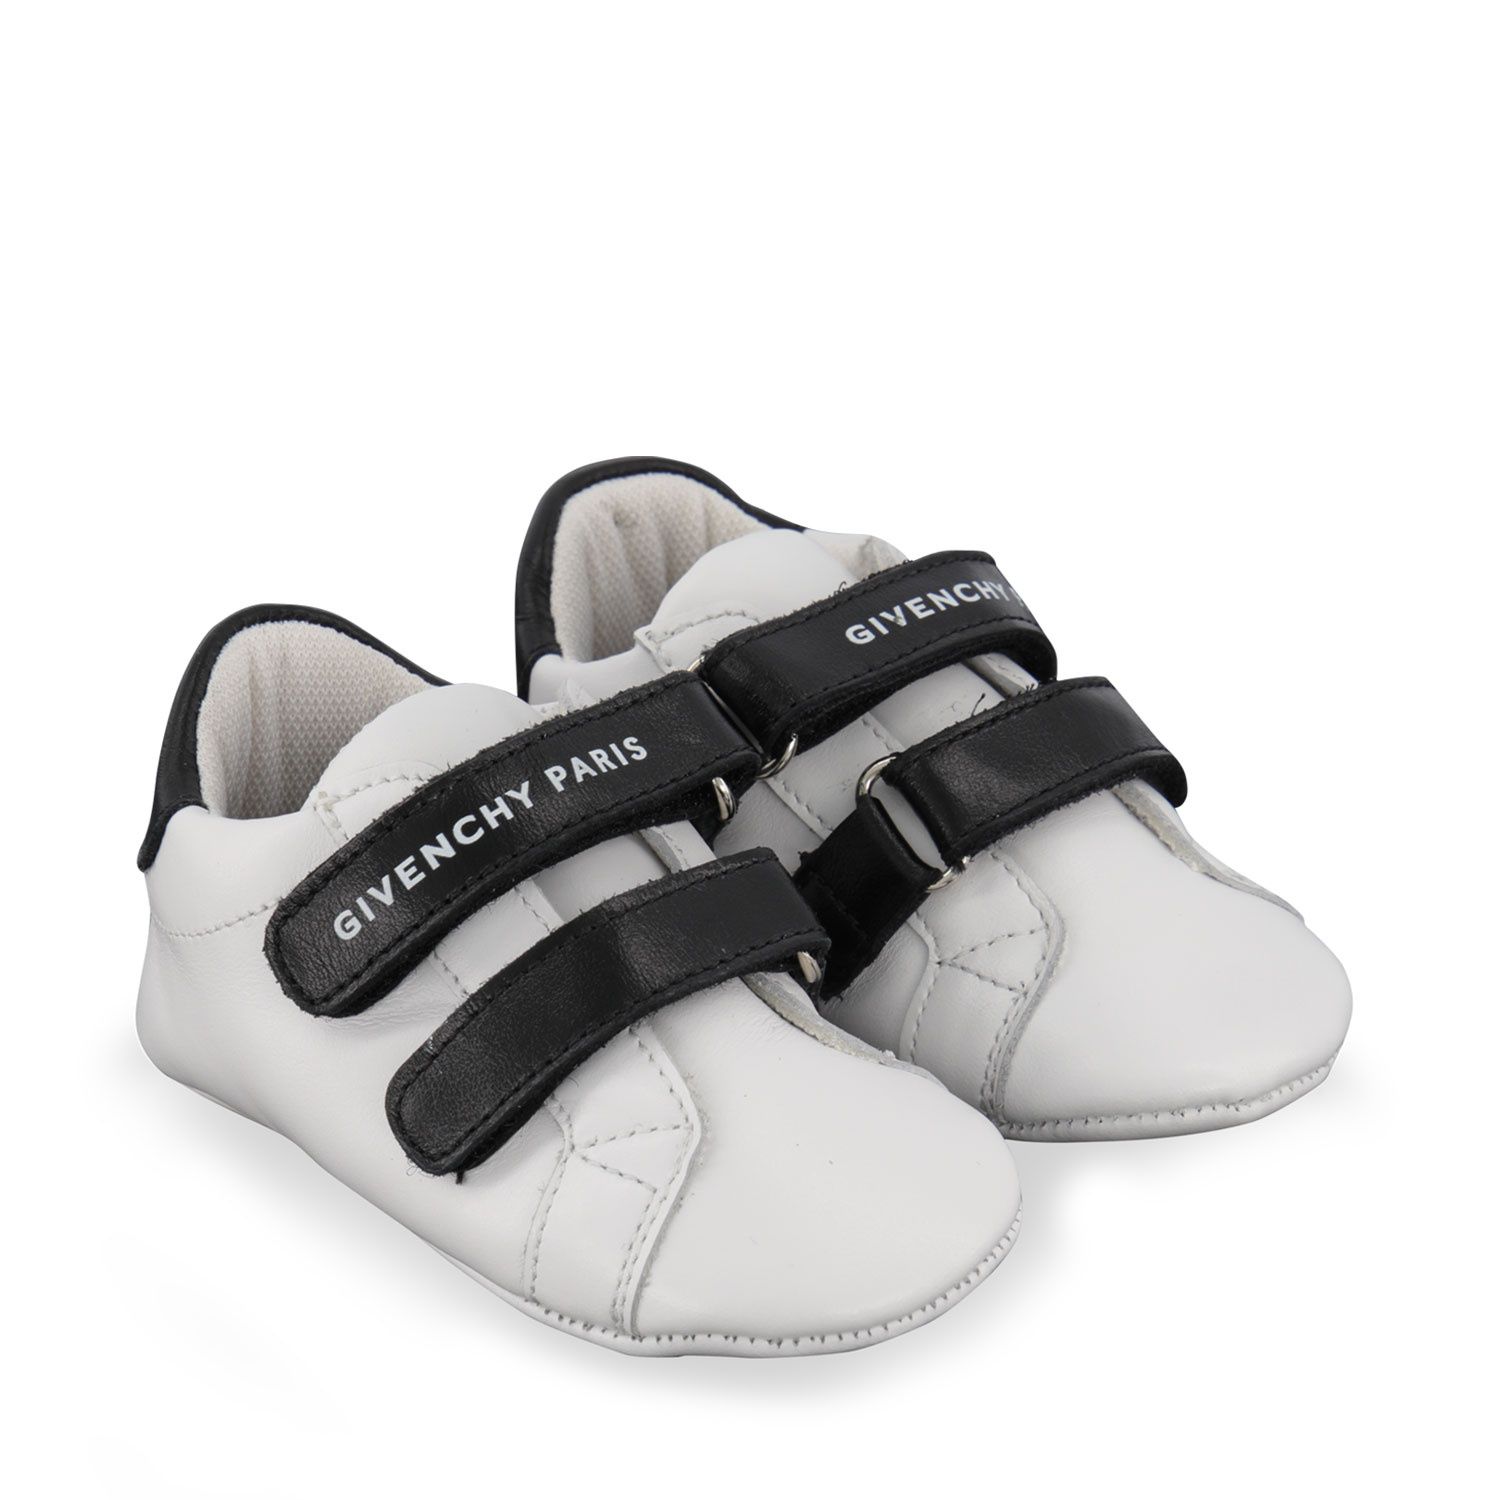 givenchy baby shoes